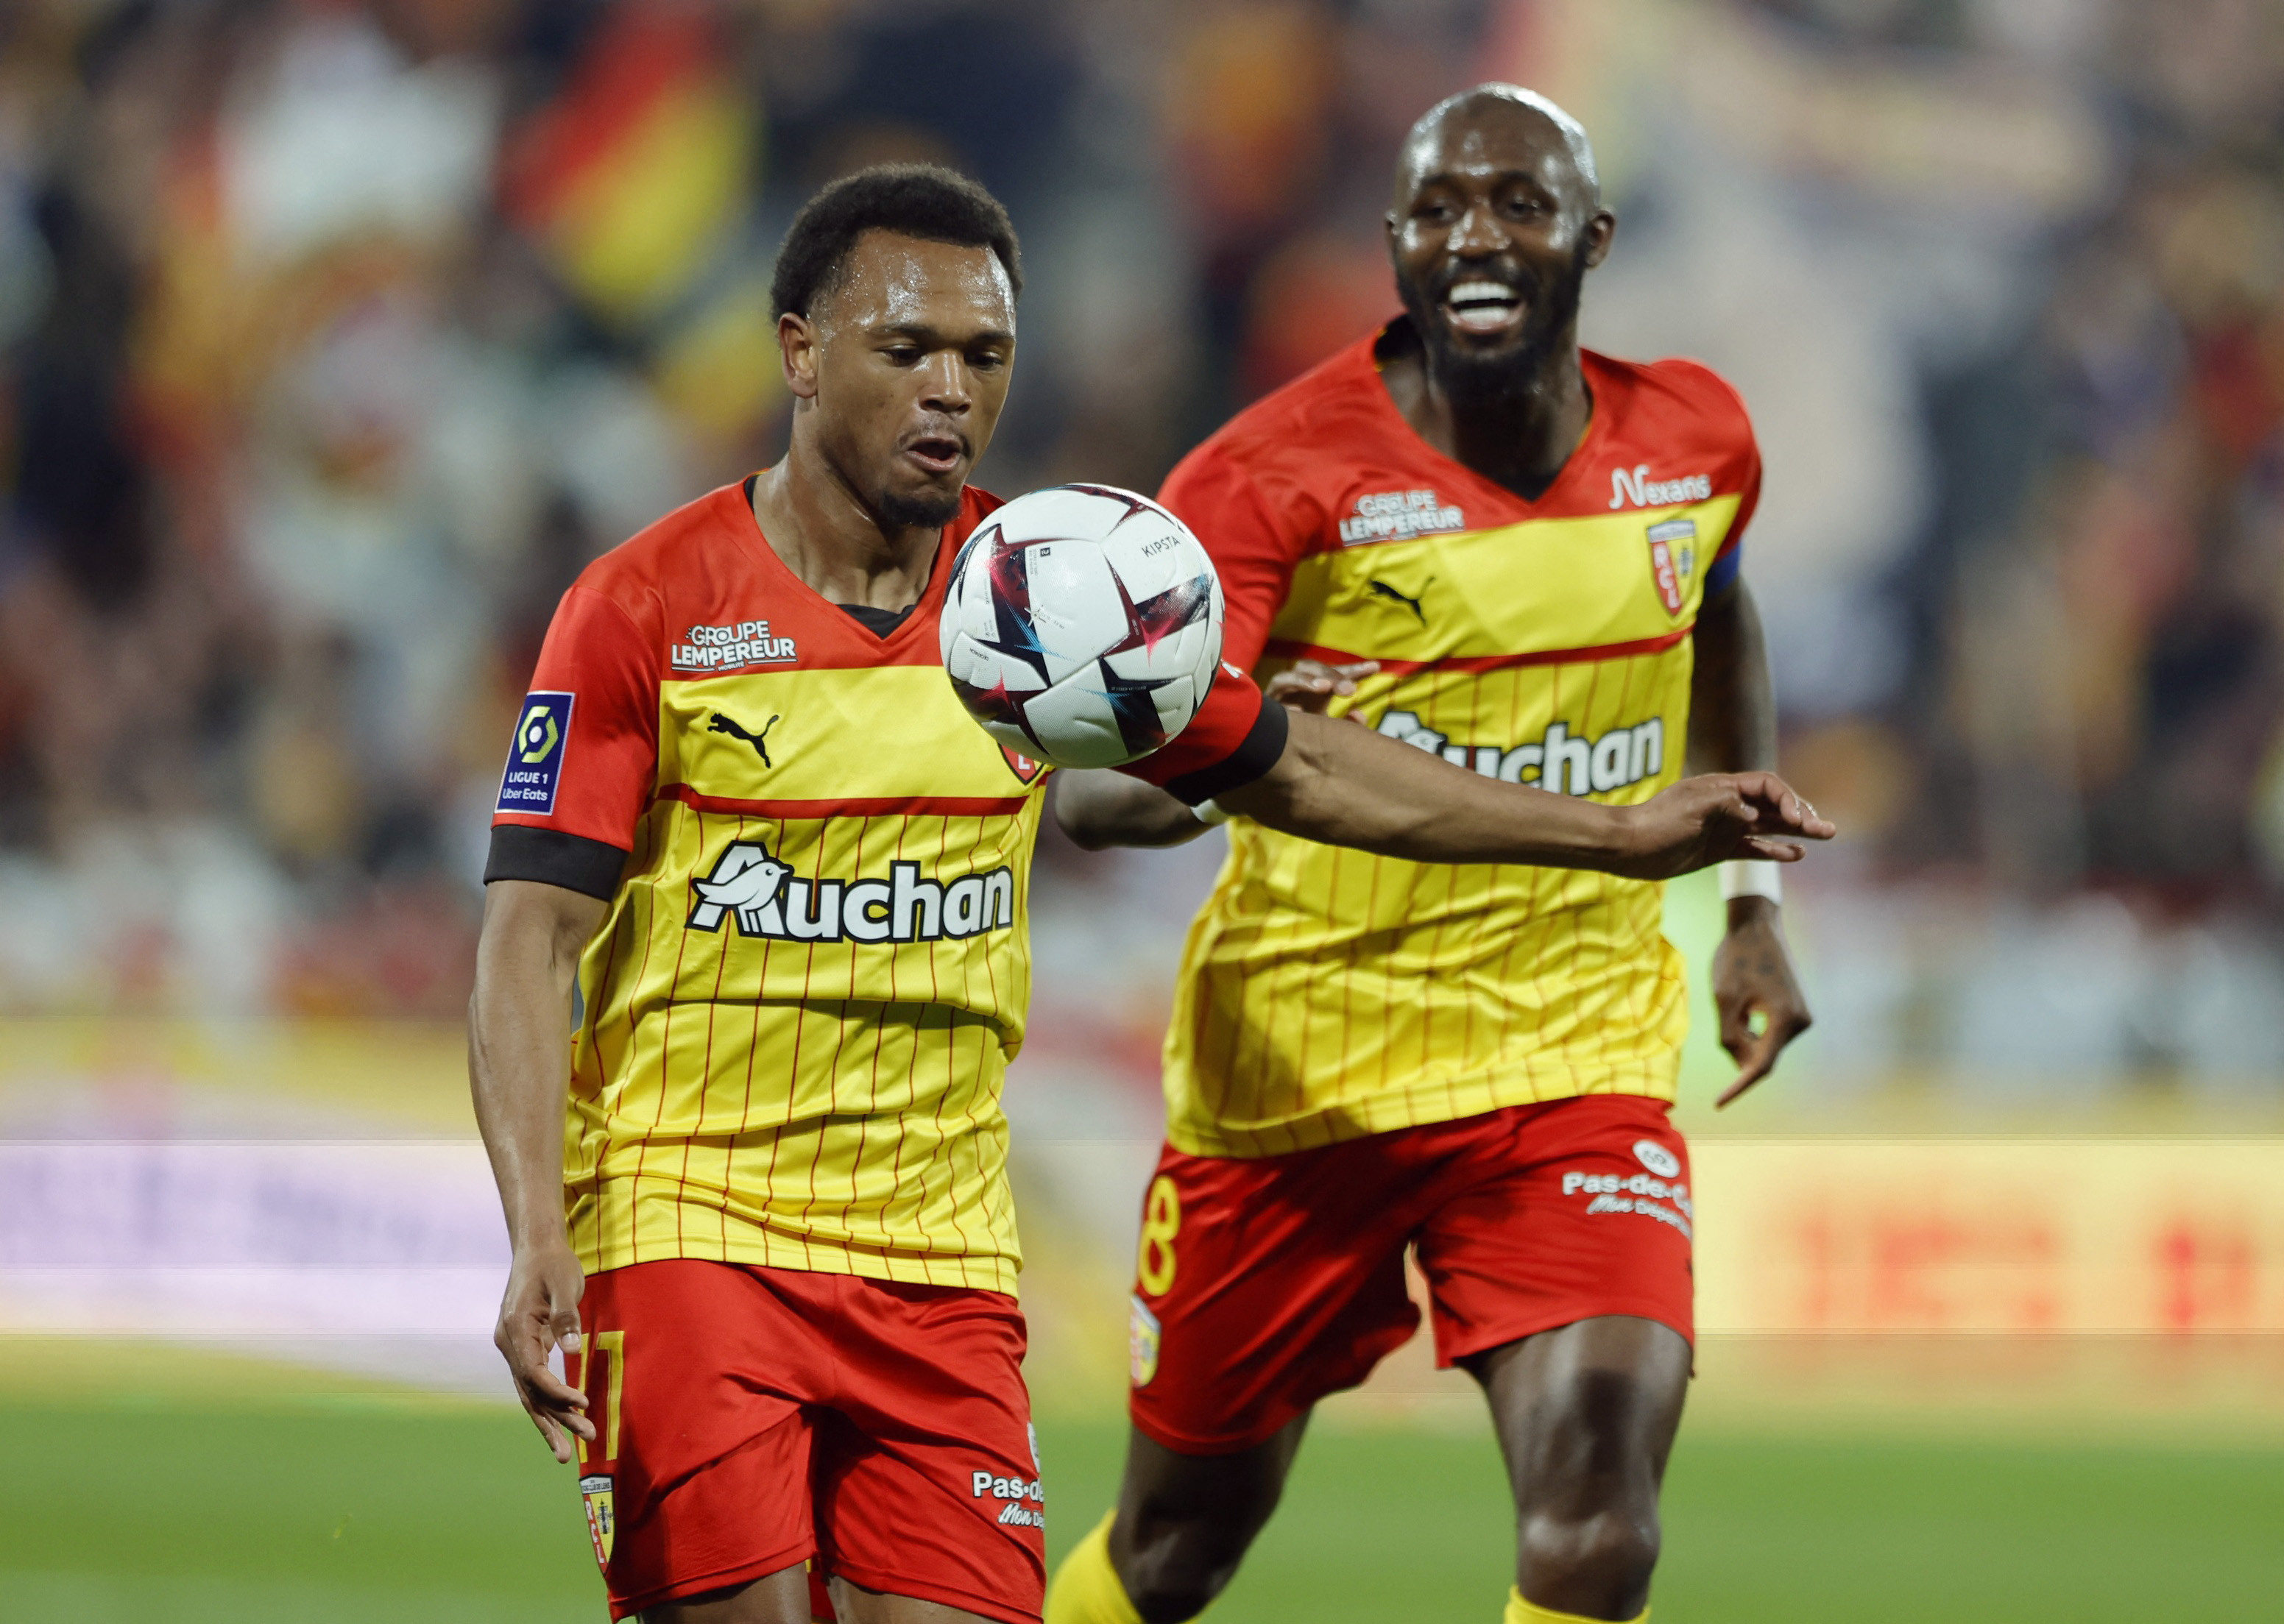 Openda shines as Lens boost Champions League hopes with Monaco win